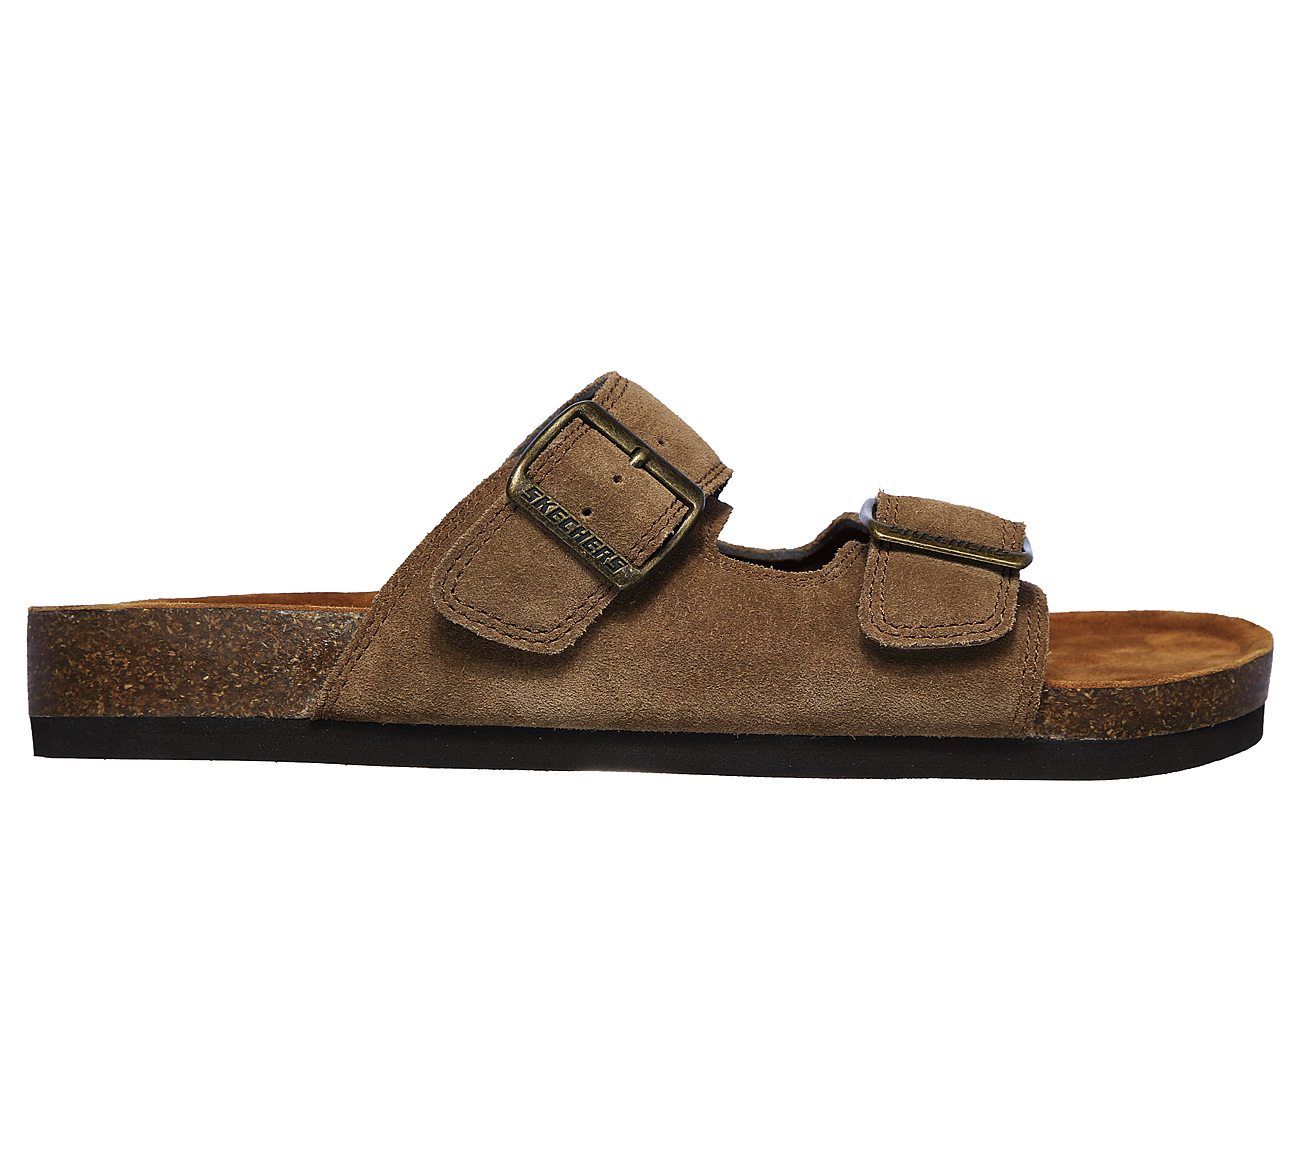 strap sandals off 77% - databank.ly